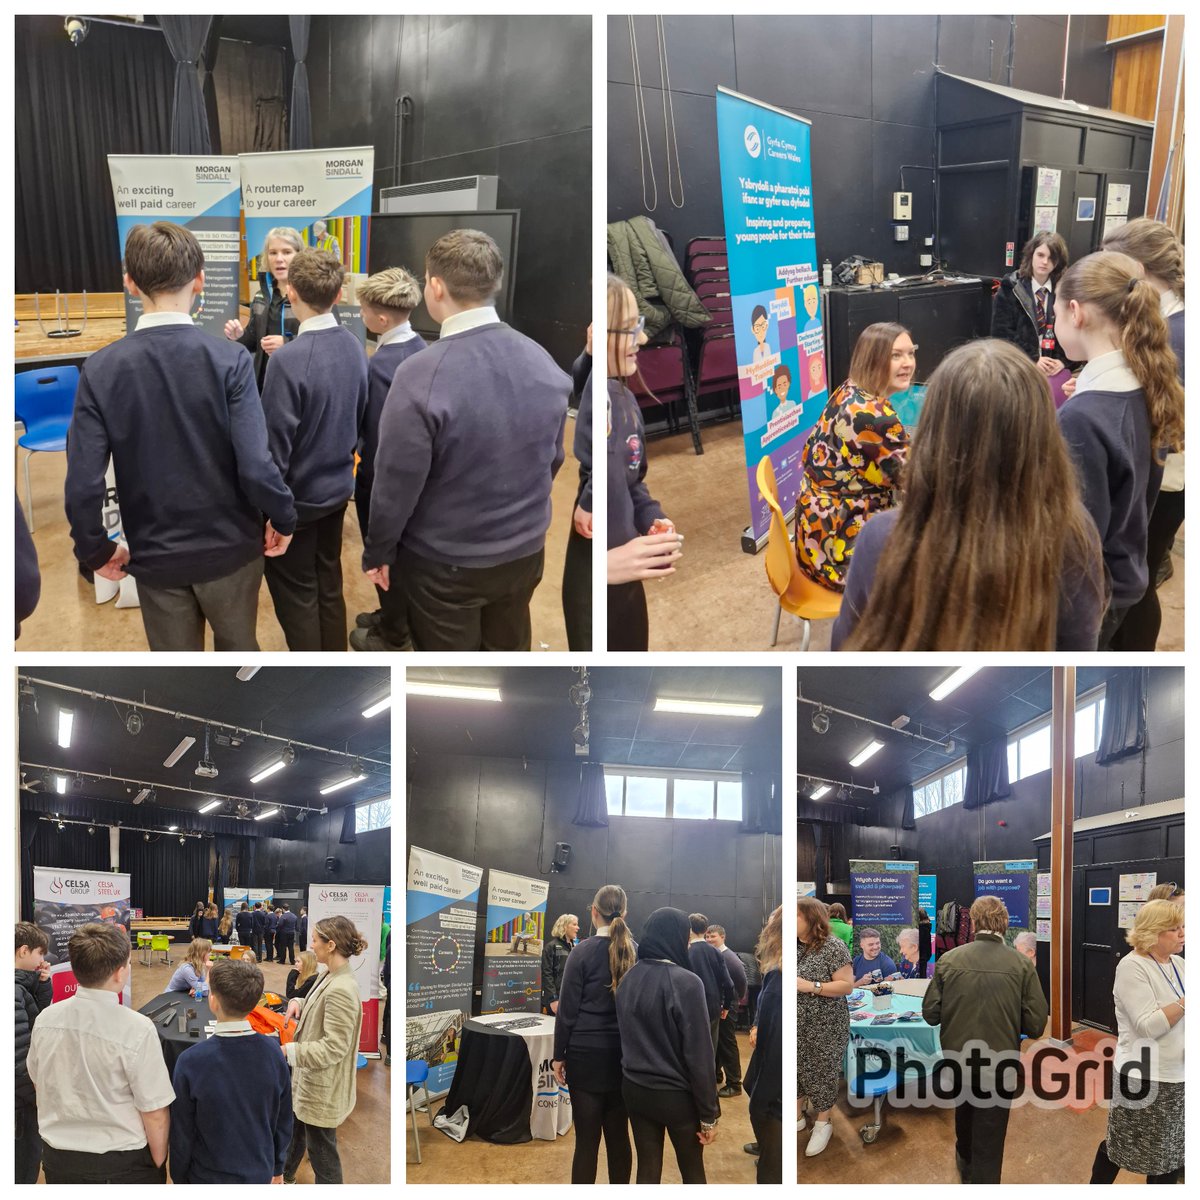 Great start to the Yr8 event @HawthornHighSch.A huge thanks to all the employers who are attending today enhancing Yr8s knowledge of the world of work and careers in these sectors @acttrainingltd @WeCareWales @CwmTafMorgannwg @CelsaGroup @morgansindall #opportunities #thankyou